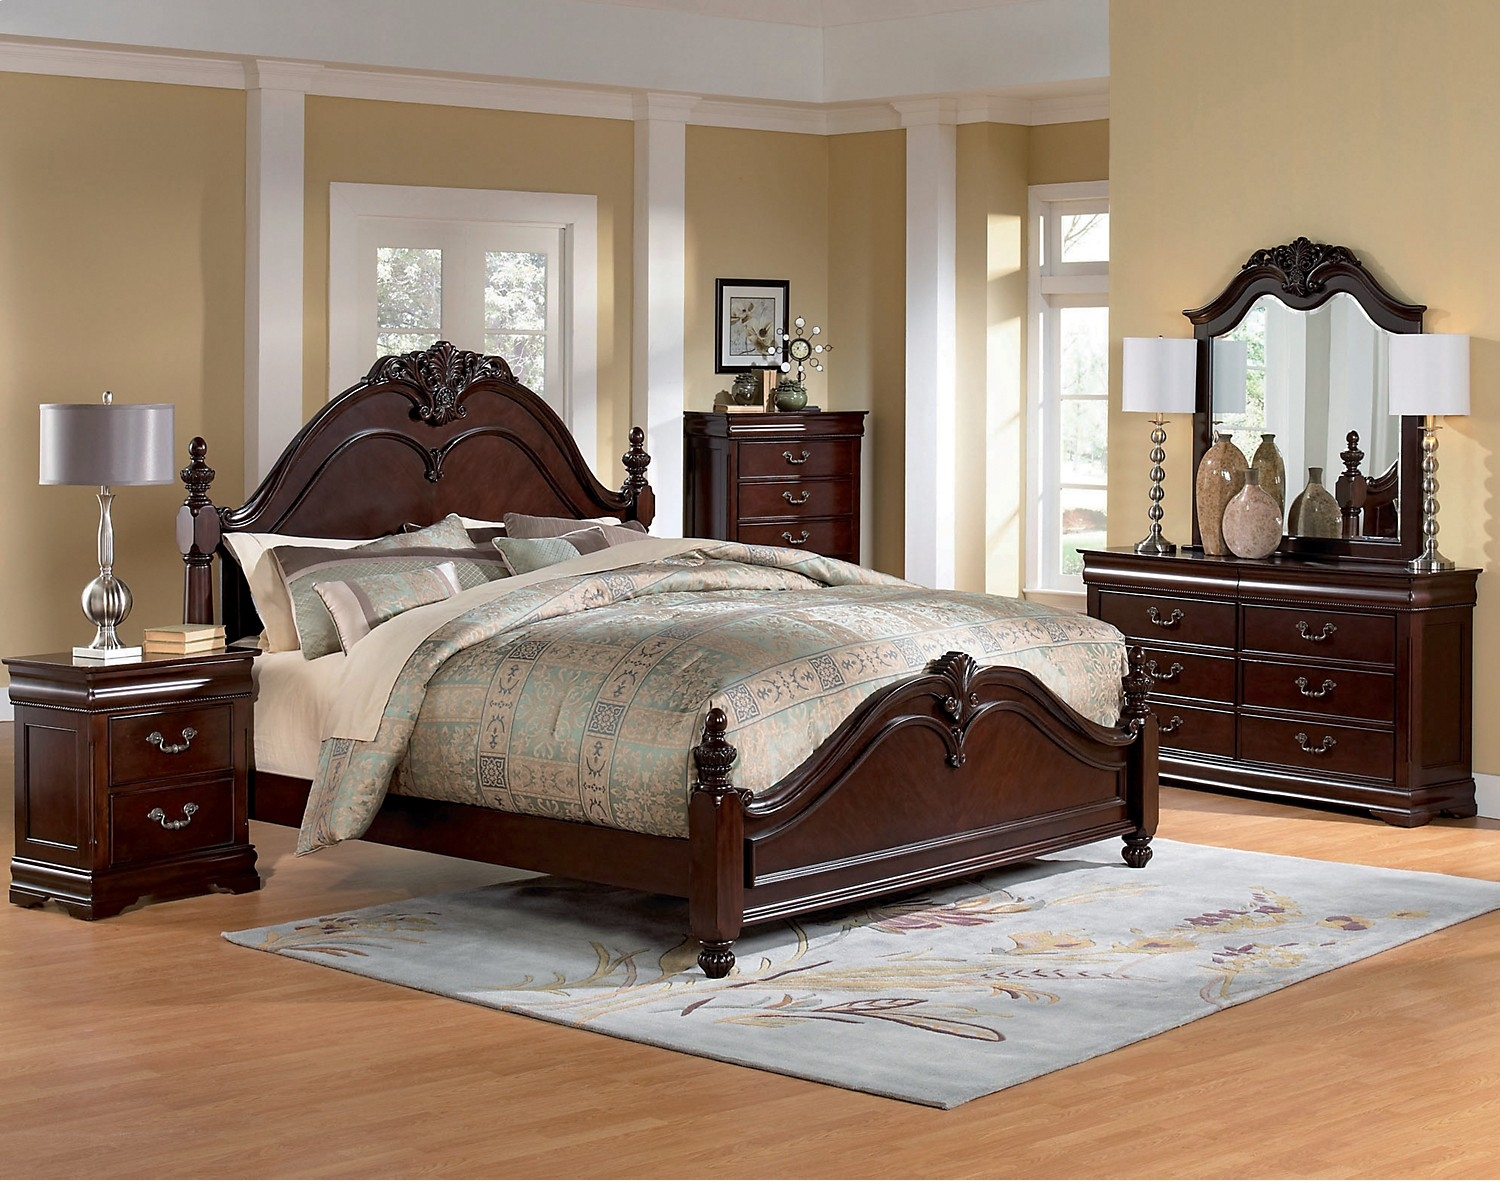 Shay King Poster Bed Westchester 6piece Queen Bedroom Set intended for sizing 1500 X 1184